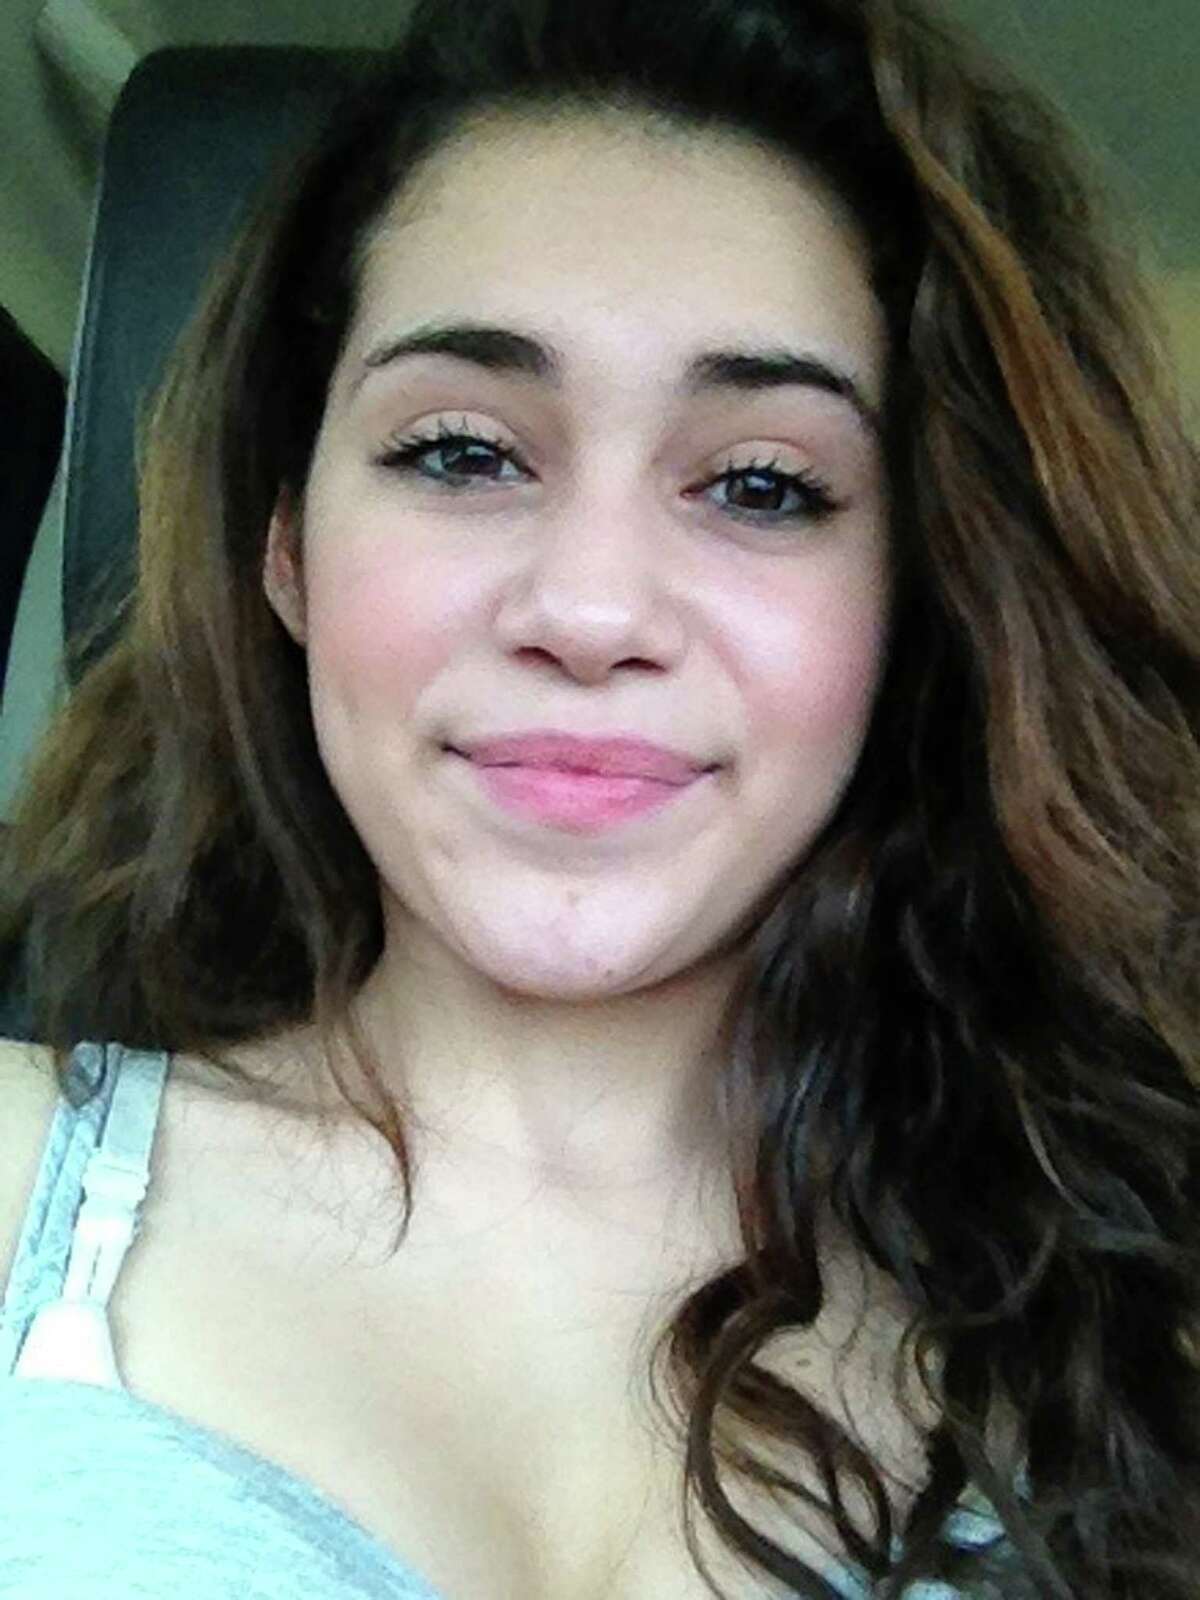 The Danbury Police Department is looking for assistance in locating a missing runaway. Ciera Authelet, 16, has been missing since July 6, 2013. Ciera is described as 5' 1", 100 pounds, medium build female. She has black shoulder length hair and brown eyes. If anyone locates Ciera please contact the Danbury Police Department 203-797-4611.